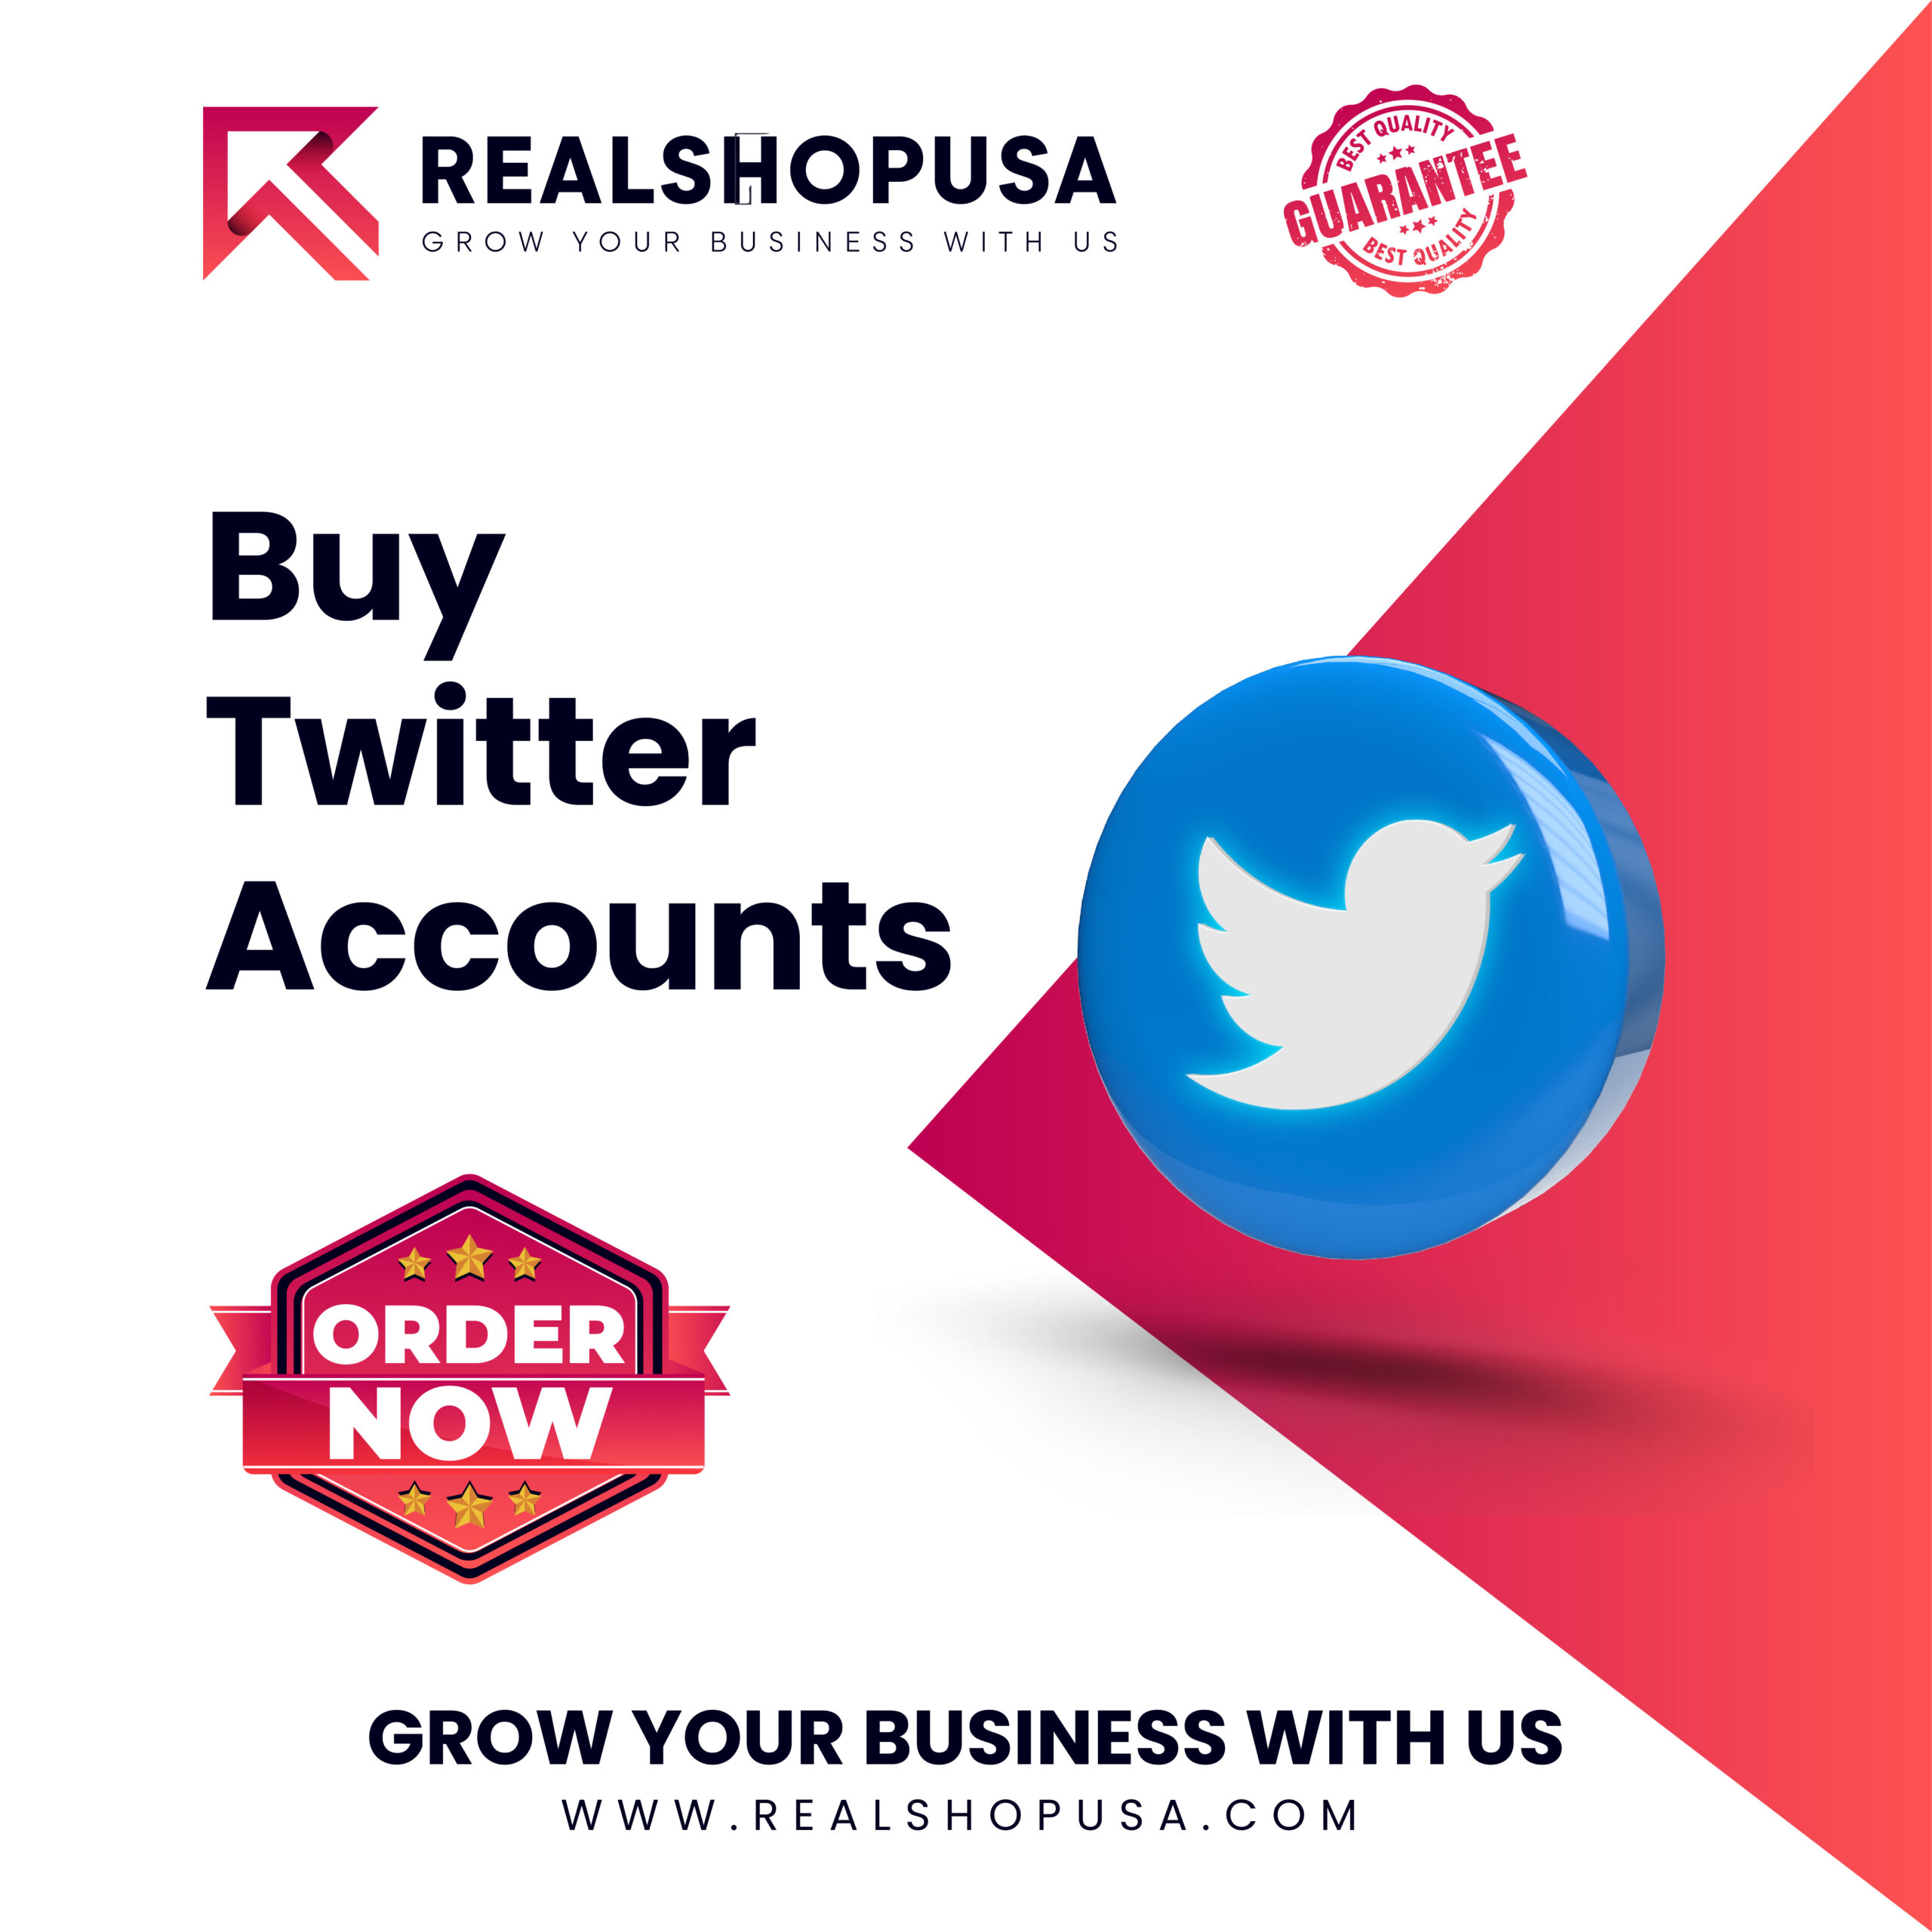 Buy Twitter Accounts - 100% Real, Active & Safe Accounts...